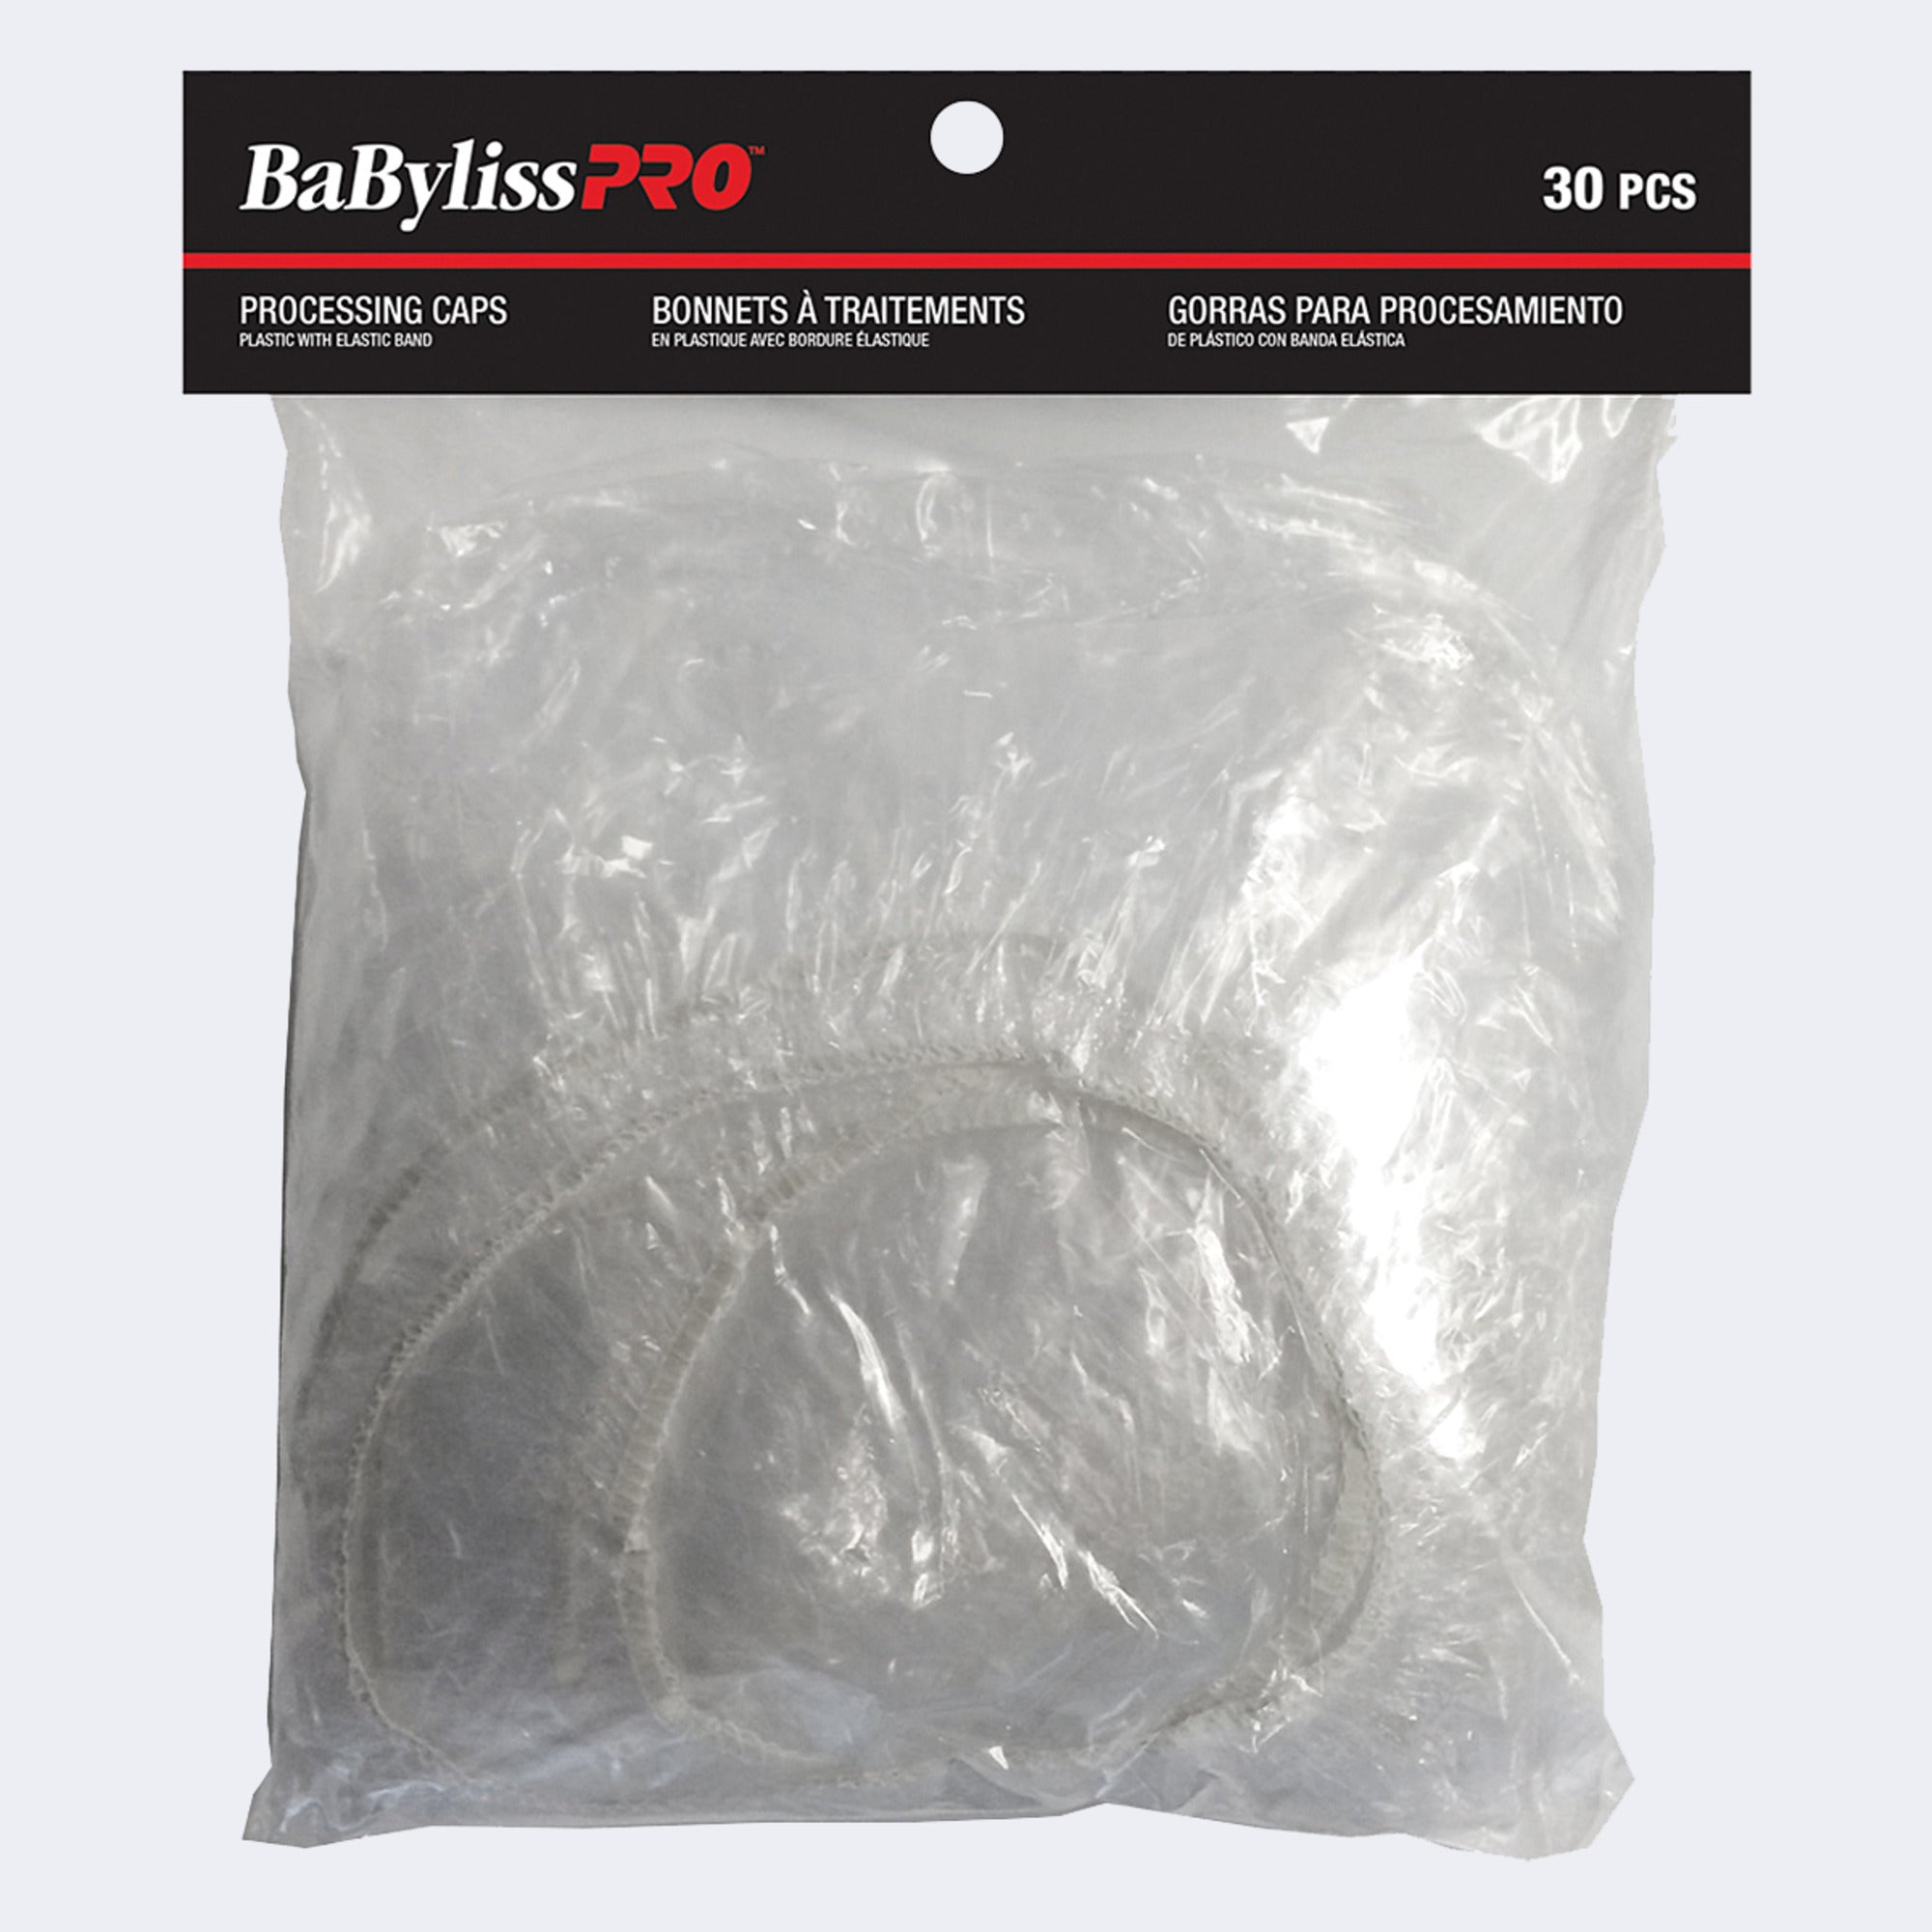 BES62UCC BABYLISS PROCESSING CAPS with elastic band - 30/PKG